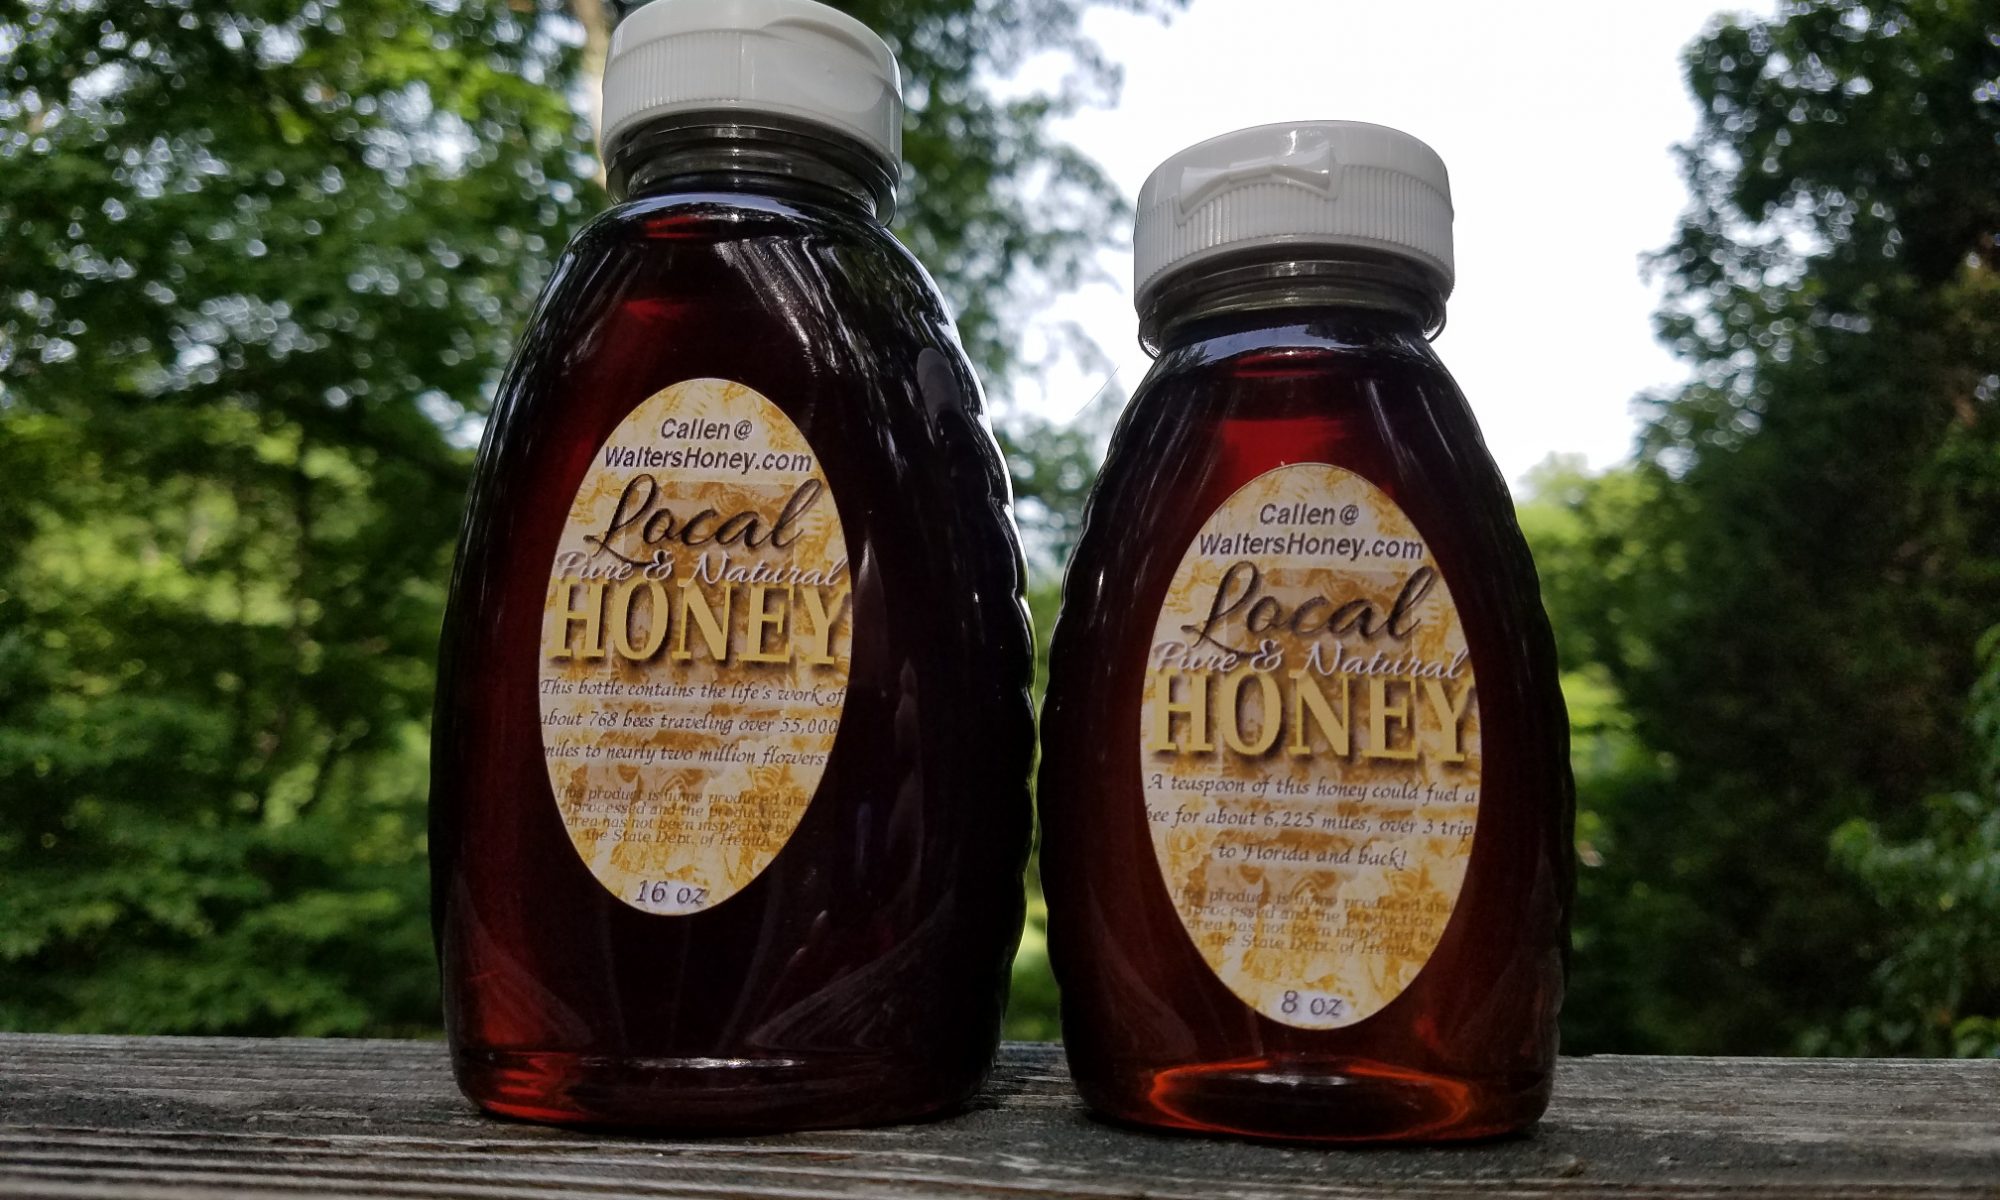 8oz and 16oz bottles of annual honey.